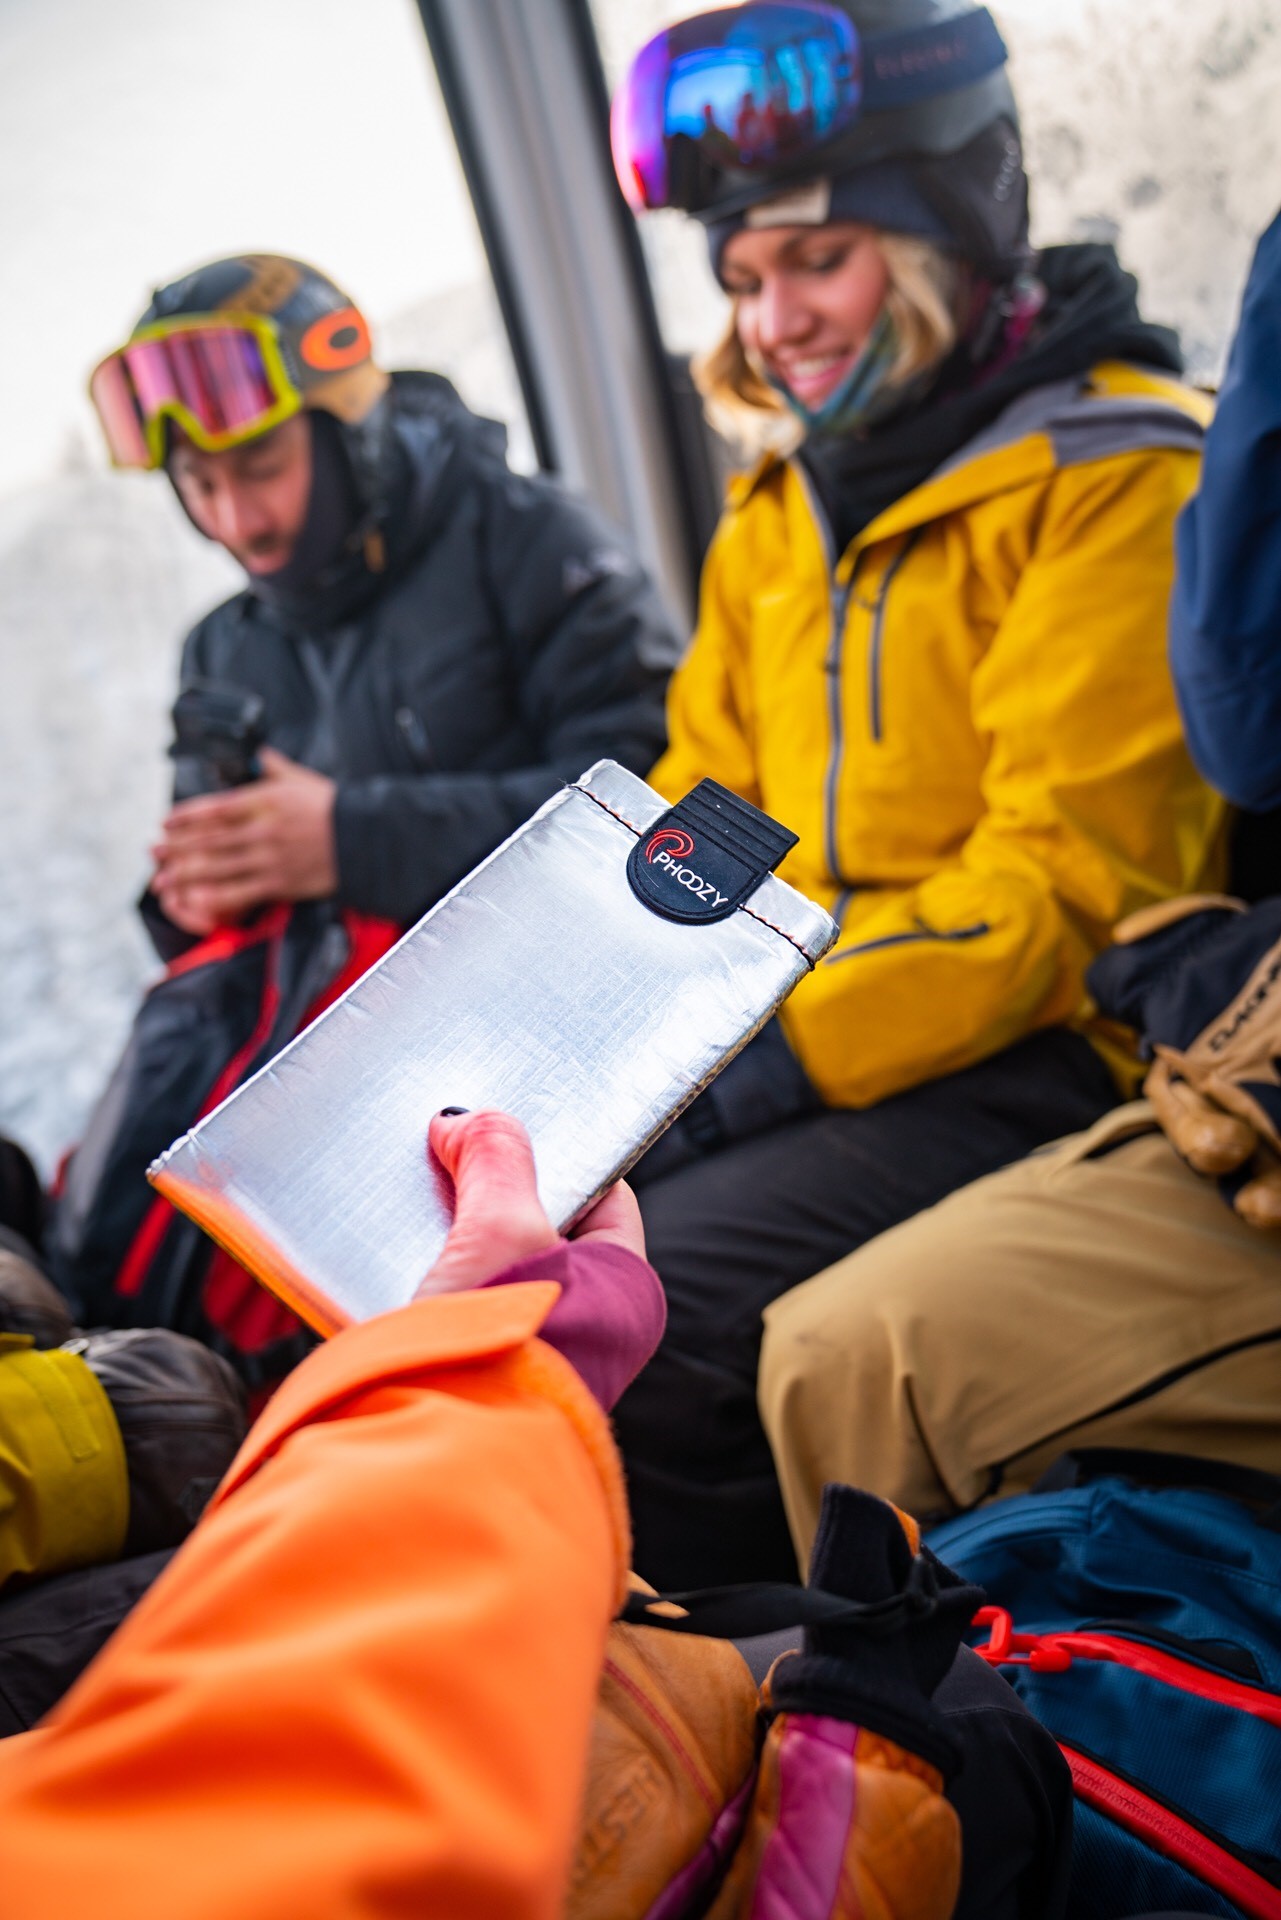 A gondola rider holds up their phone encased in a phoozy case